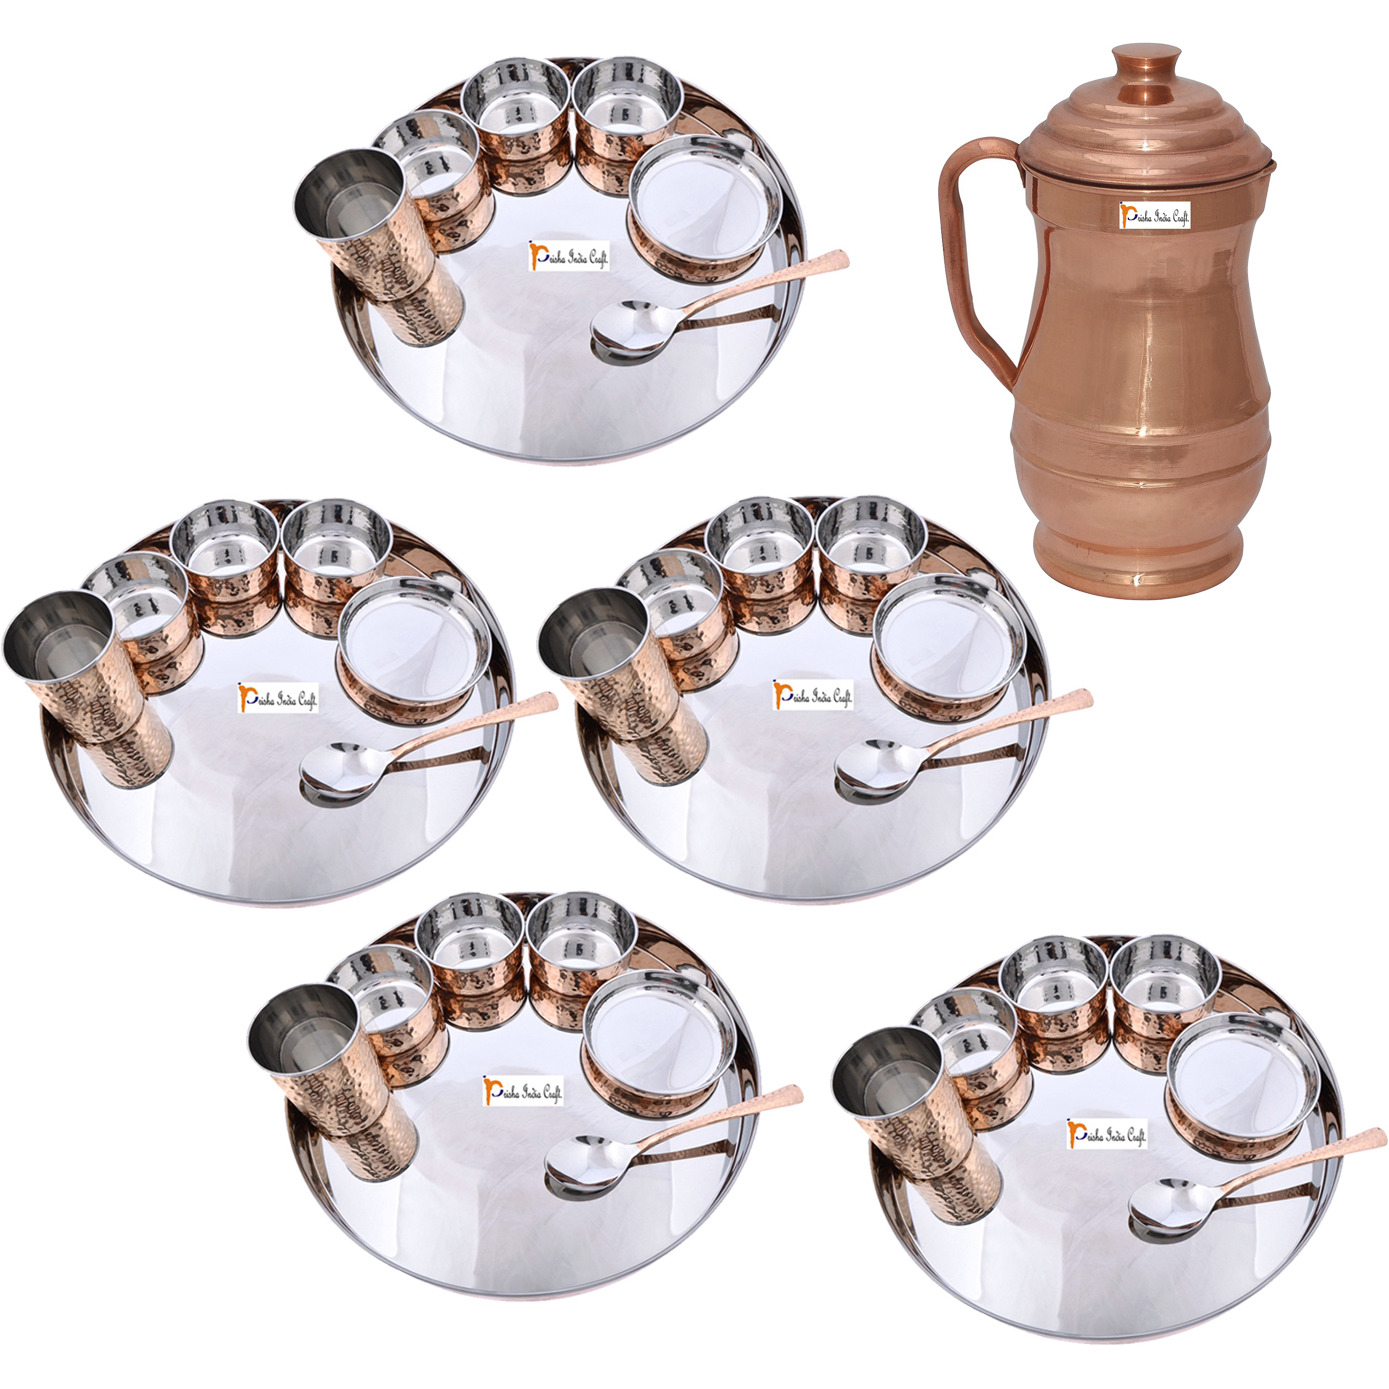 Prisha India Craft B. Set of 5 Dinnerware Traditional Stainless Steel Copper Dinner Set of Thali Plate, Bowls, Glass and Spoon, Dia 13  With 1 Pure Copper Maharaja Pitcher Jug - Christmas Gift